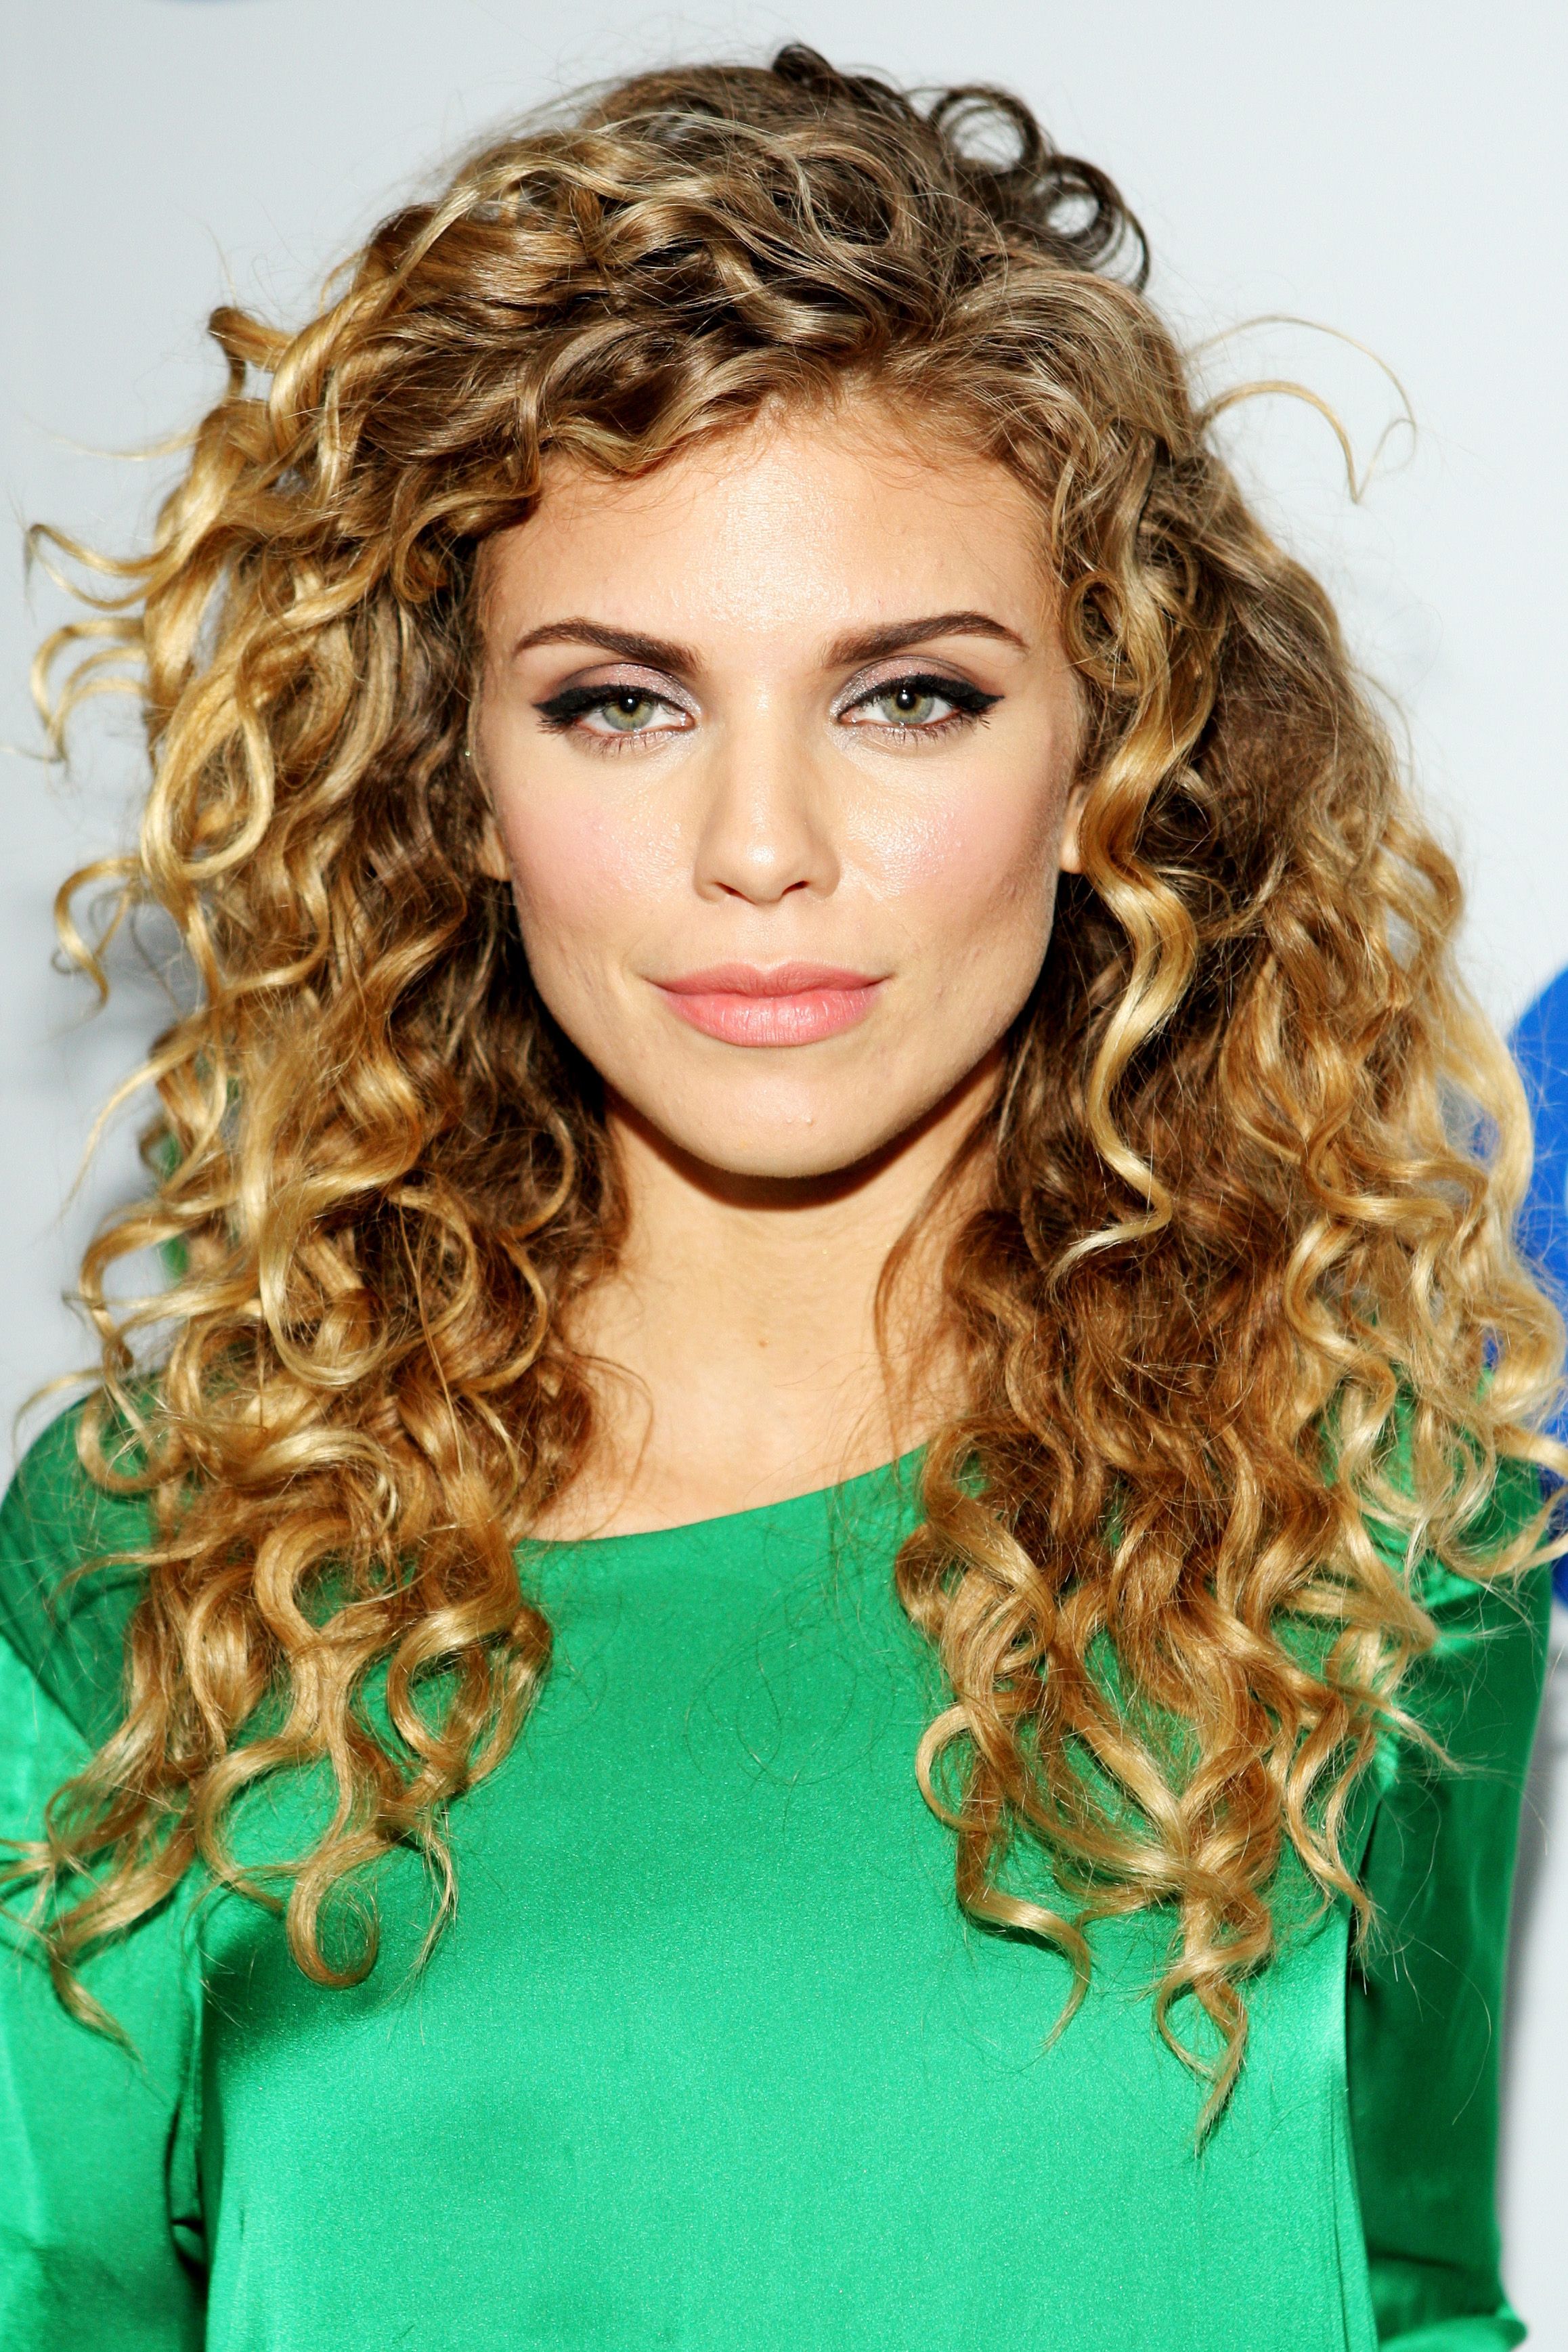 23 long curly blonde hairstyles - Hairstyle Fix | Long hair styles, Curly  hair styles, Blonde hair